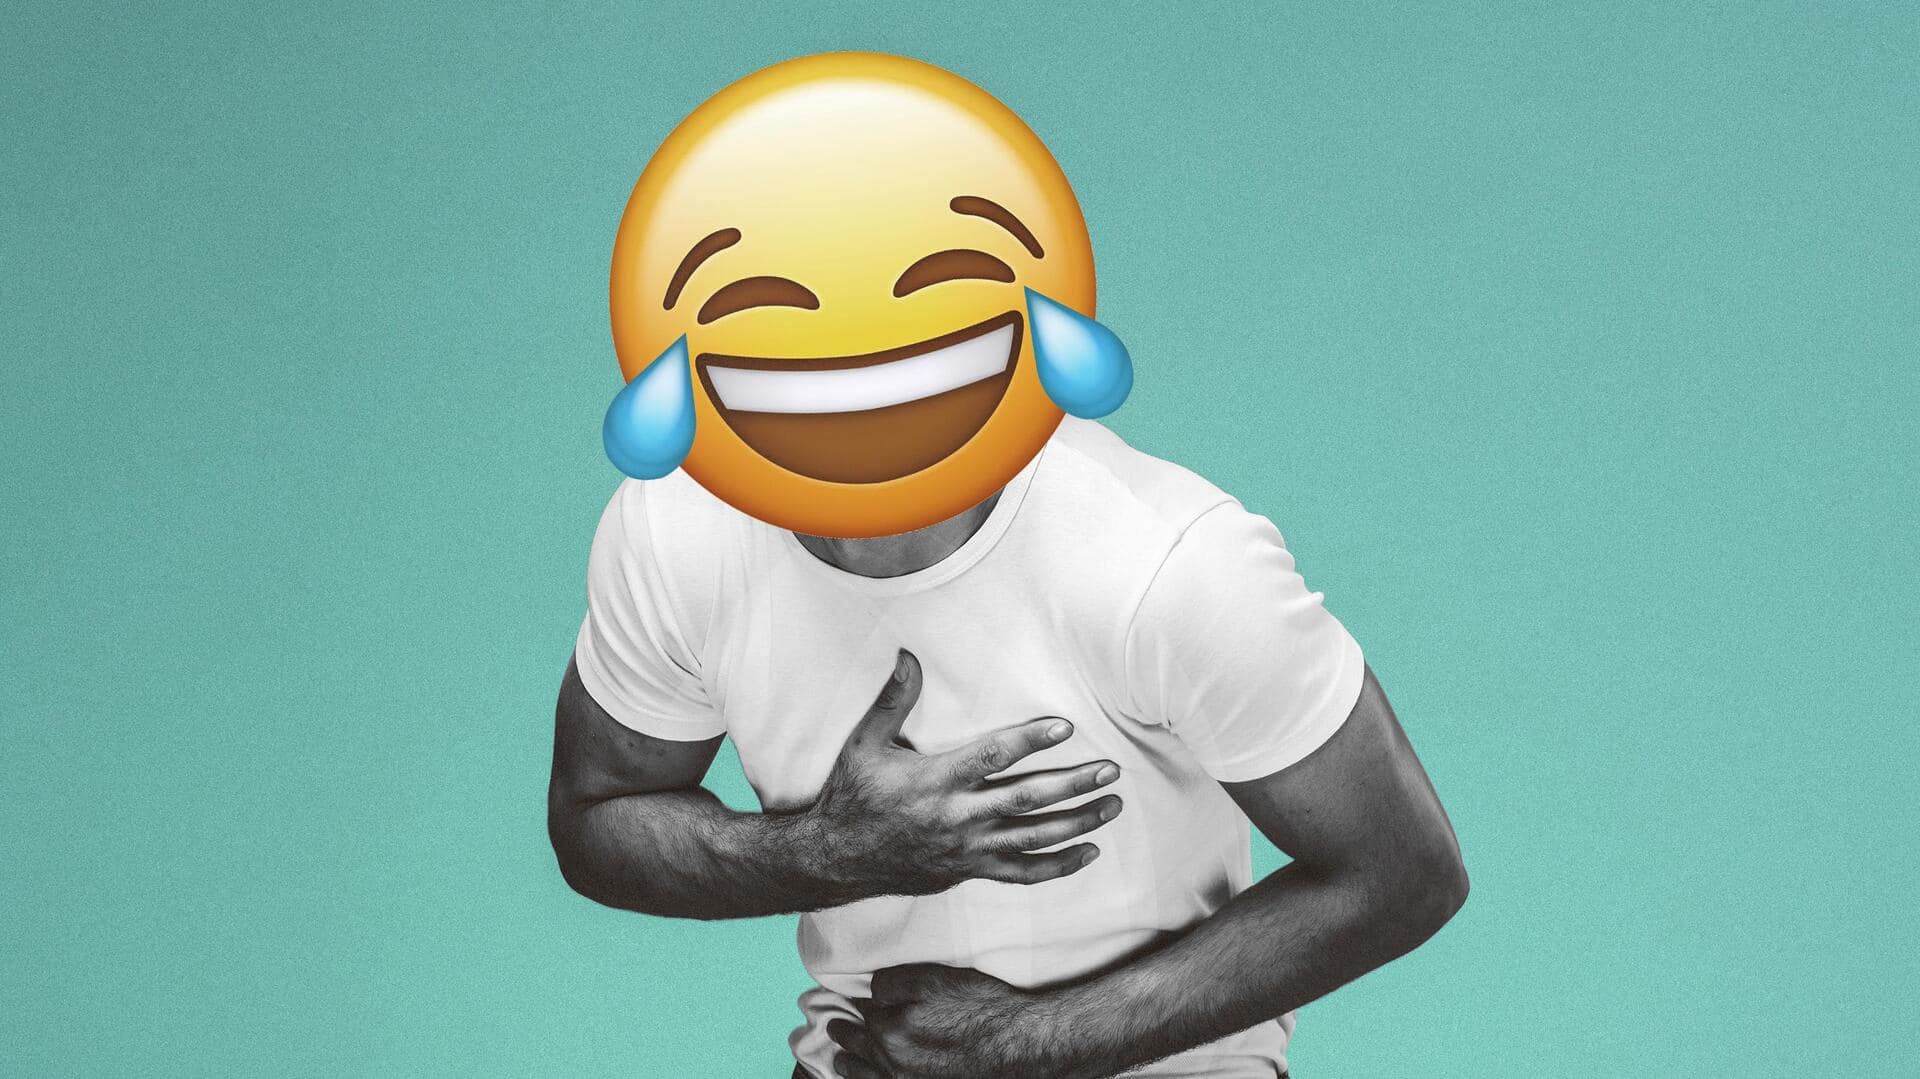 IJBOL: The newest laughter trend in Gen-Z glossary